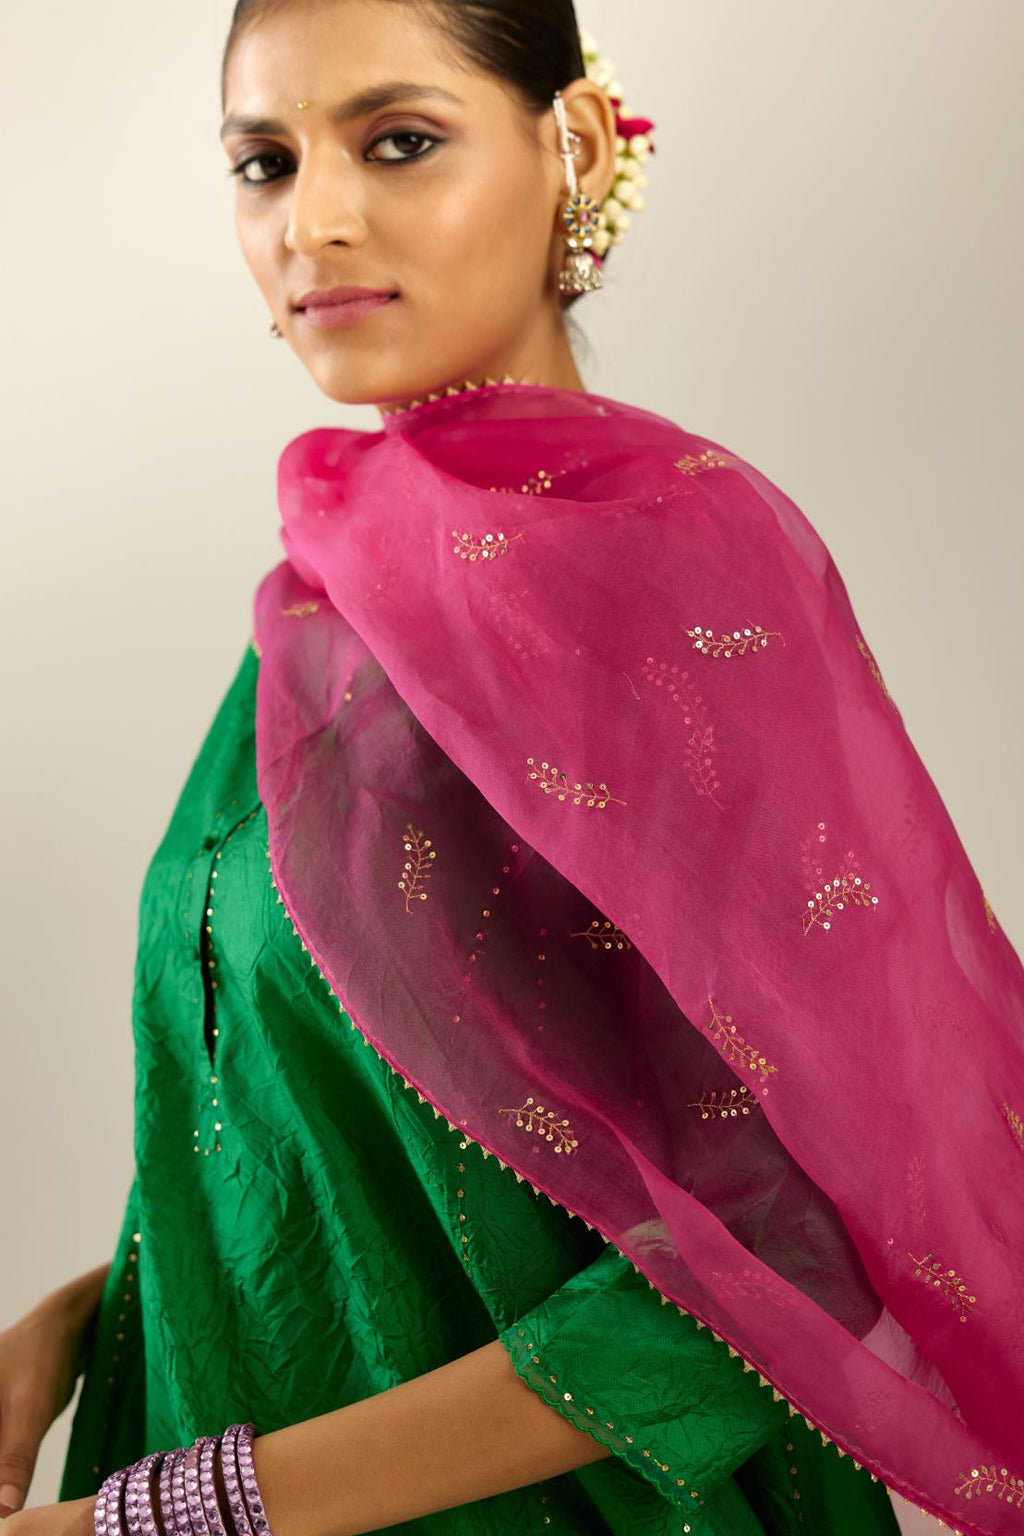 Raspberry silk organza dupatta with embroidered leaf clusters on all four corners of the dupatta and small leaf motif sprayed all over it